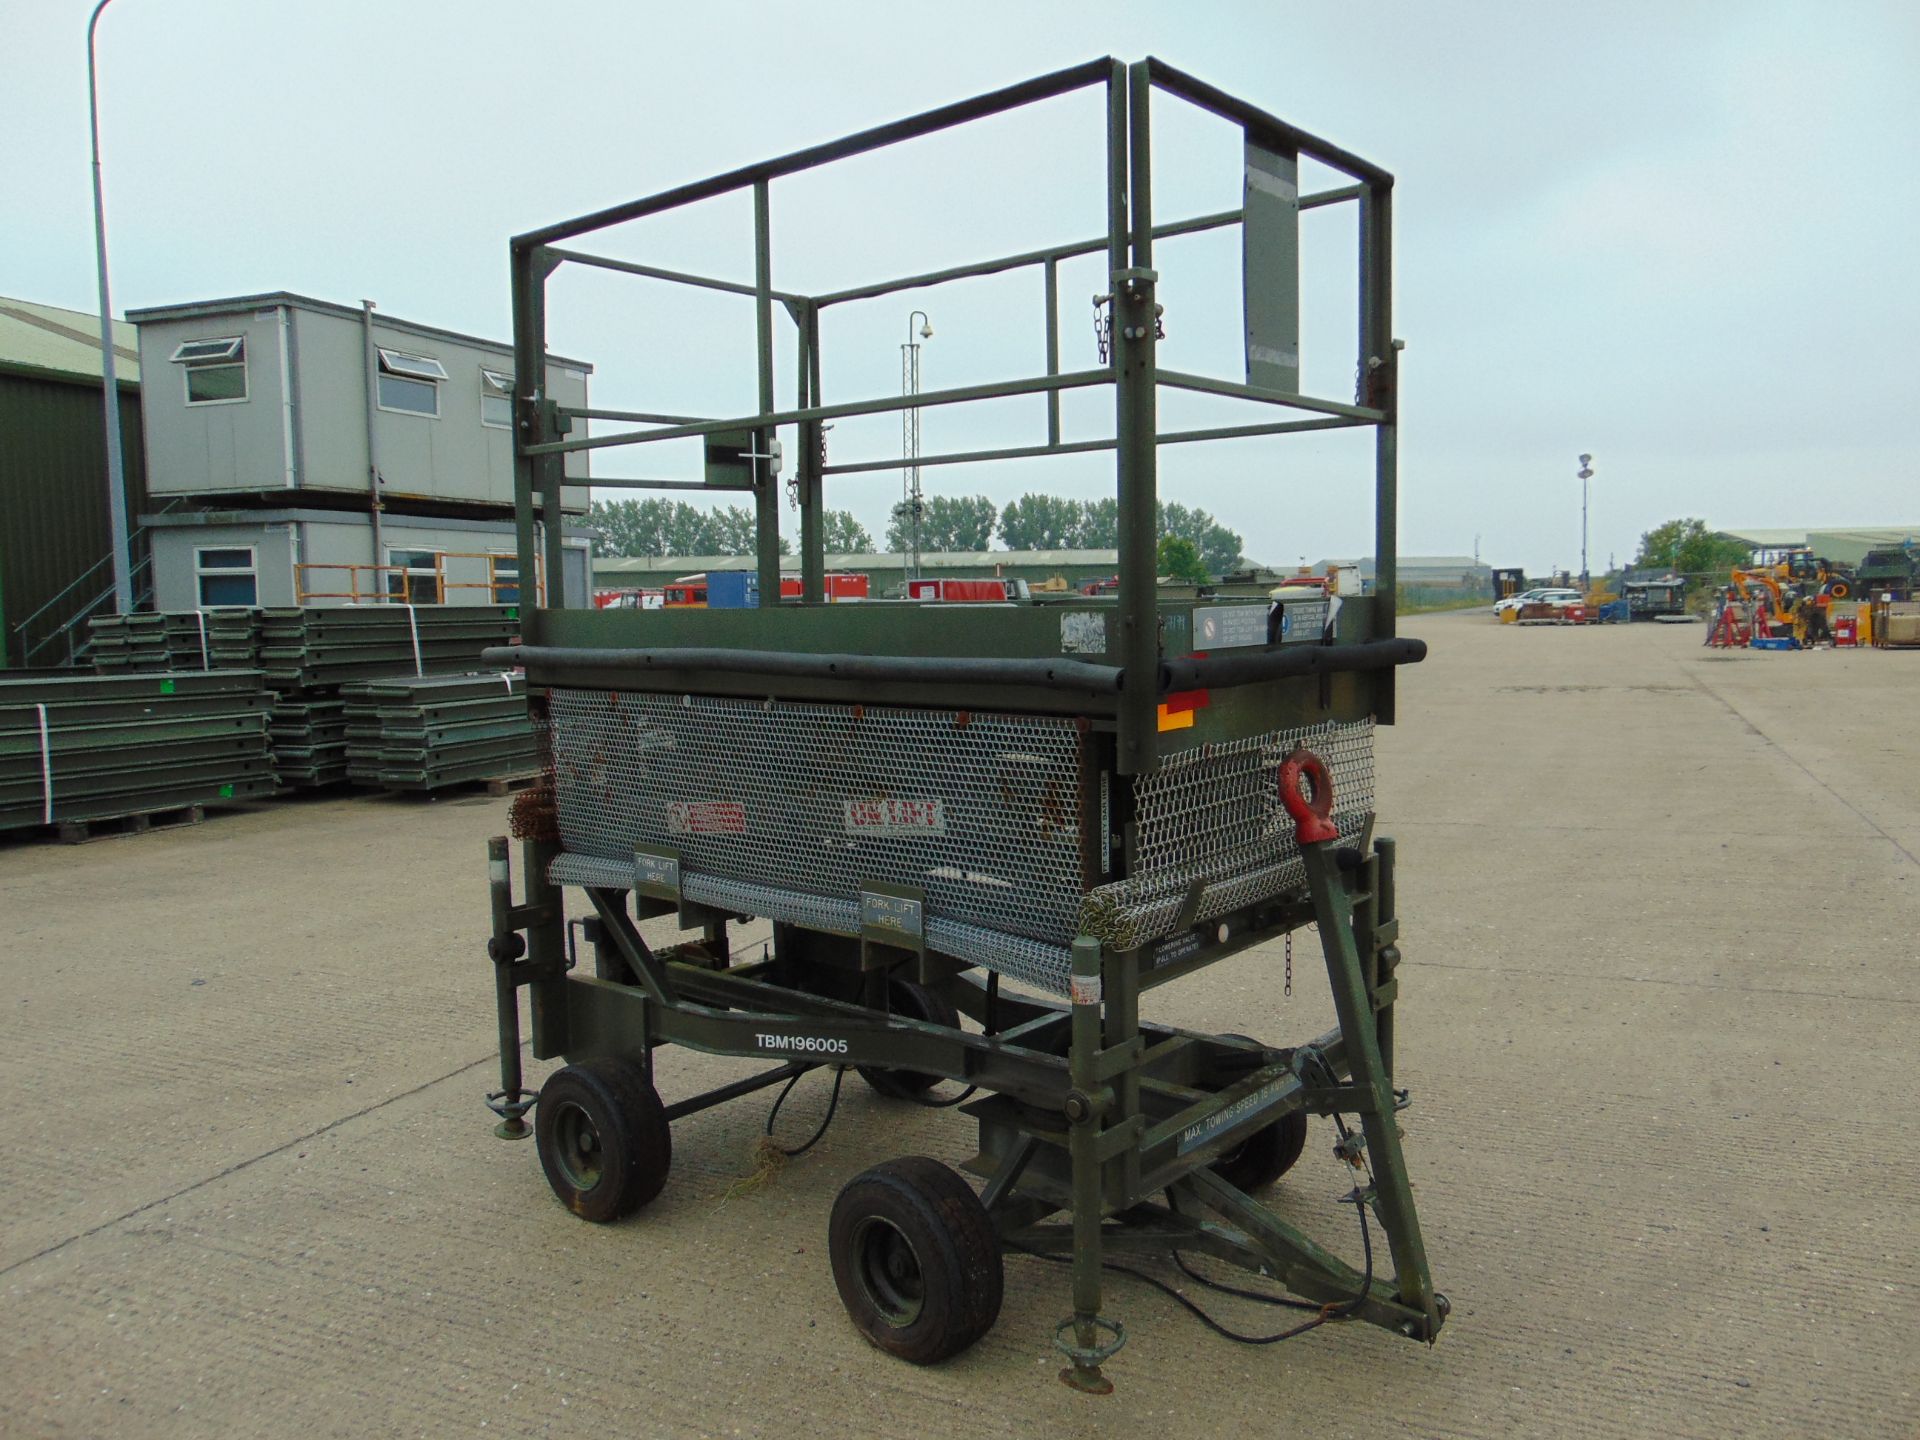 UK Lift Aircraft Hydraulic Access Platform from RAF as Shown - Image 3 of 12